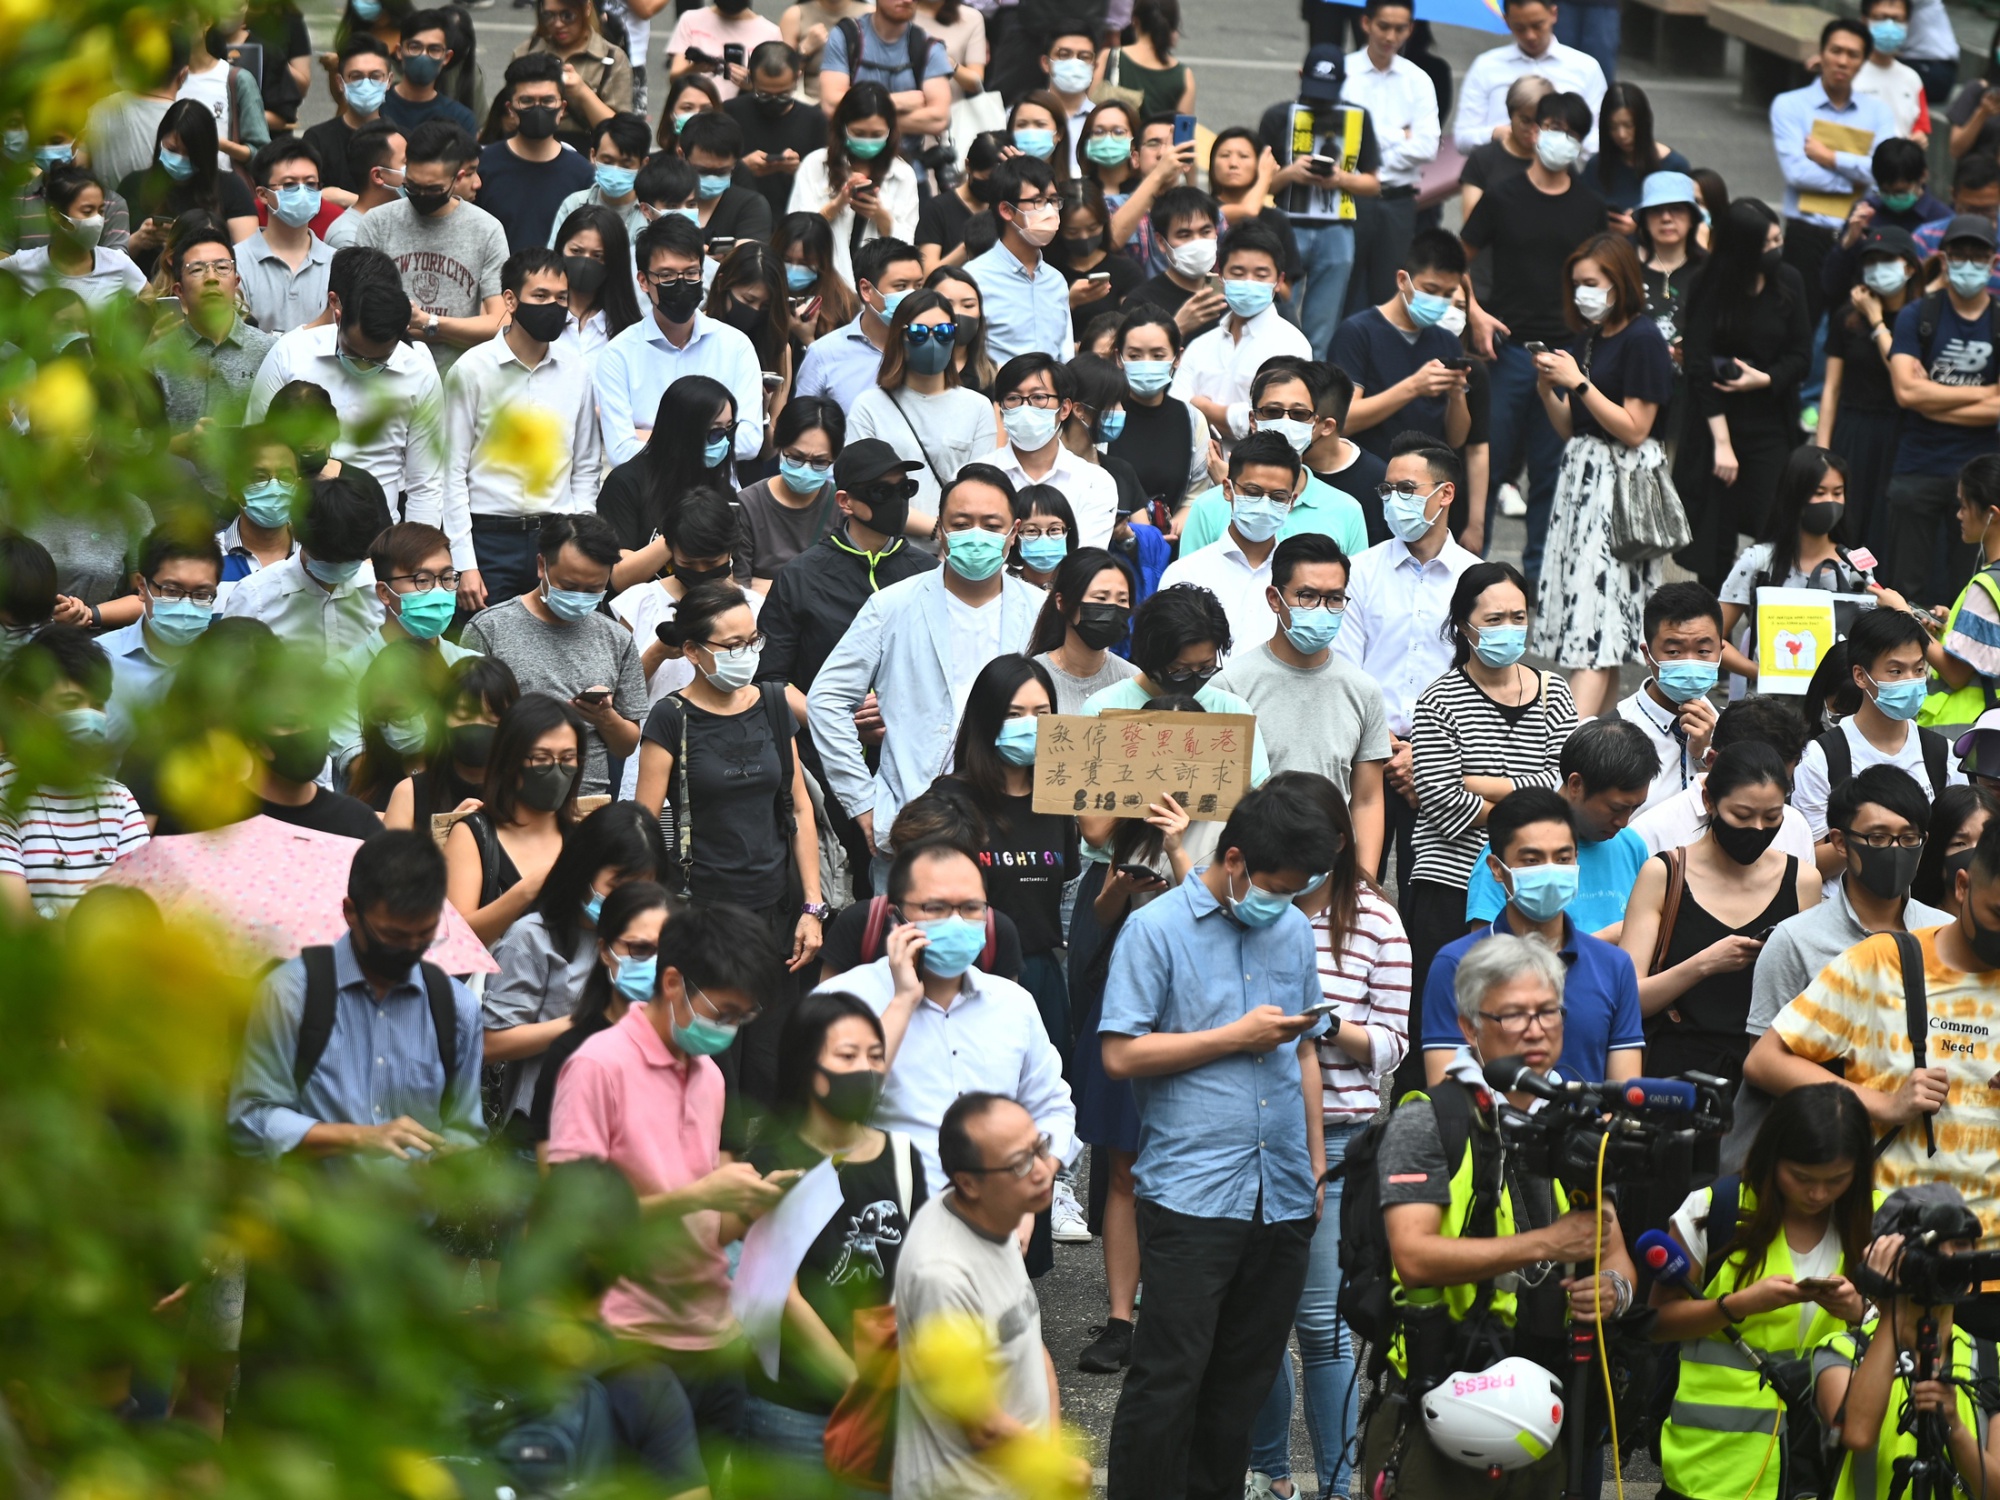 Protesters Hit Streets Amid Debate on Tactics: Hong Kong Update - Bloomberg